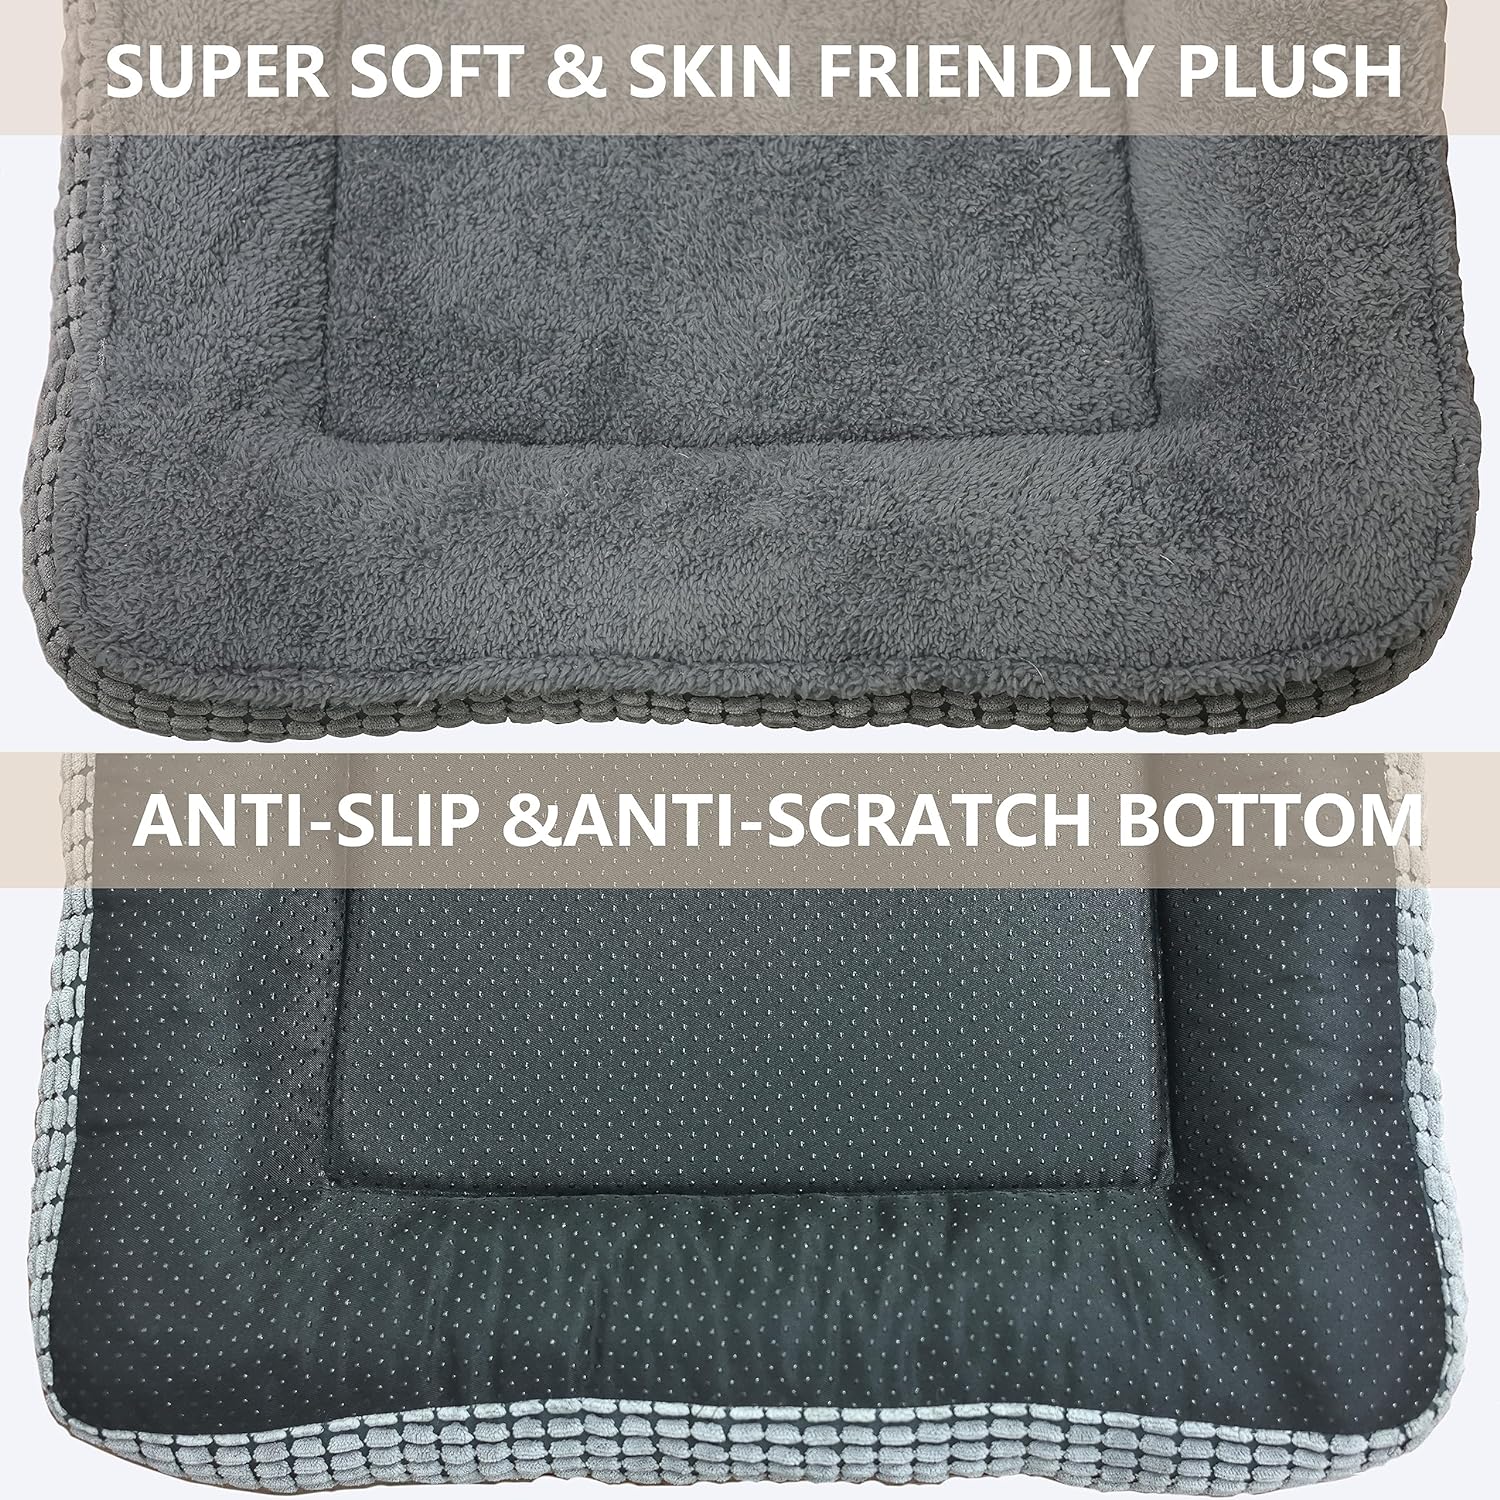 Dog Beds Mattress Crate Pad for Medium/Large Dogs Fit Metal,Ultra Soft, Washable Anti-Slip Kennel Pad for Dogs Cozy Sleeping Mat,Gray 36inch